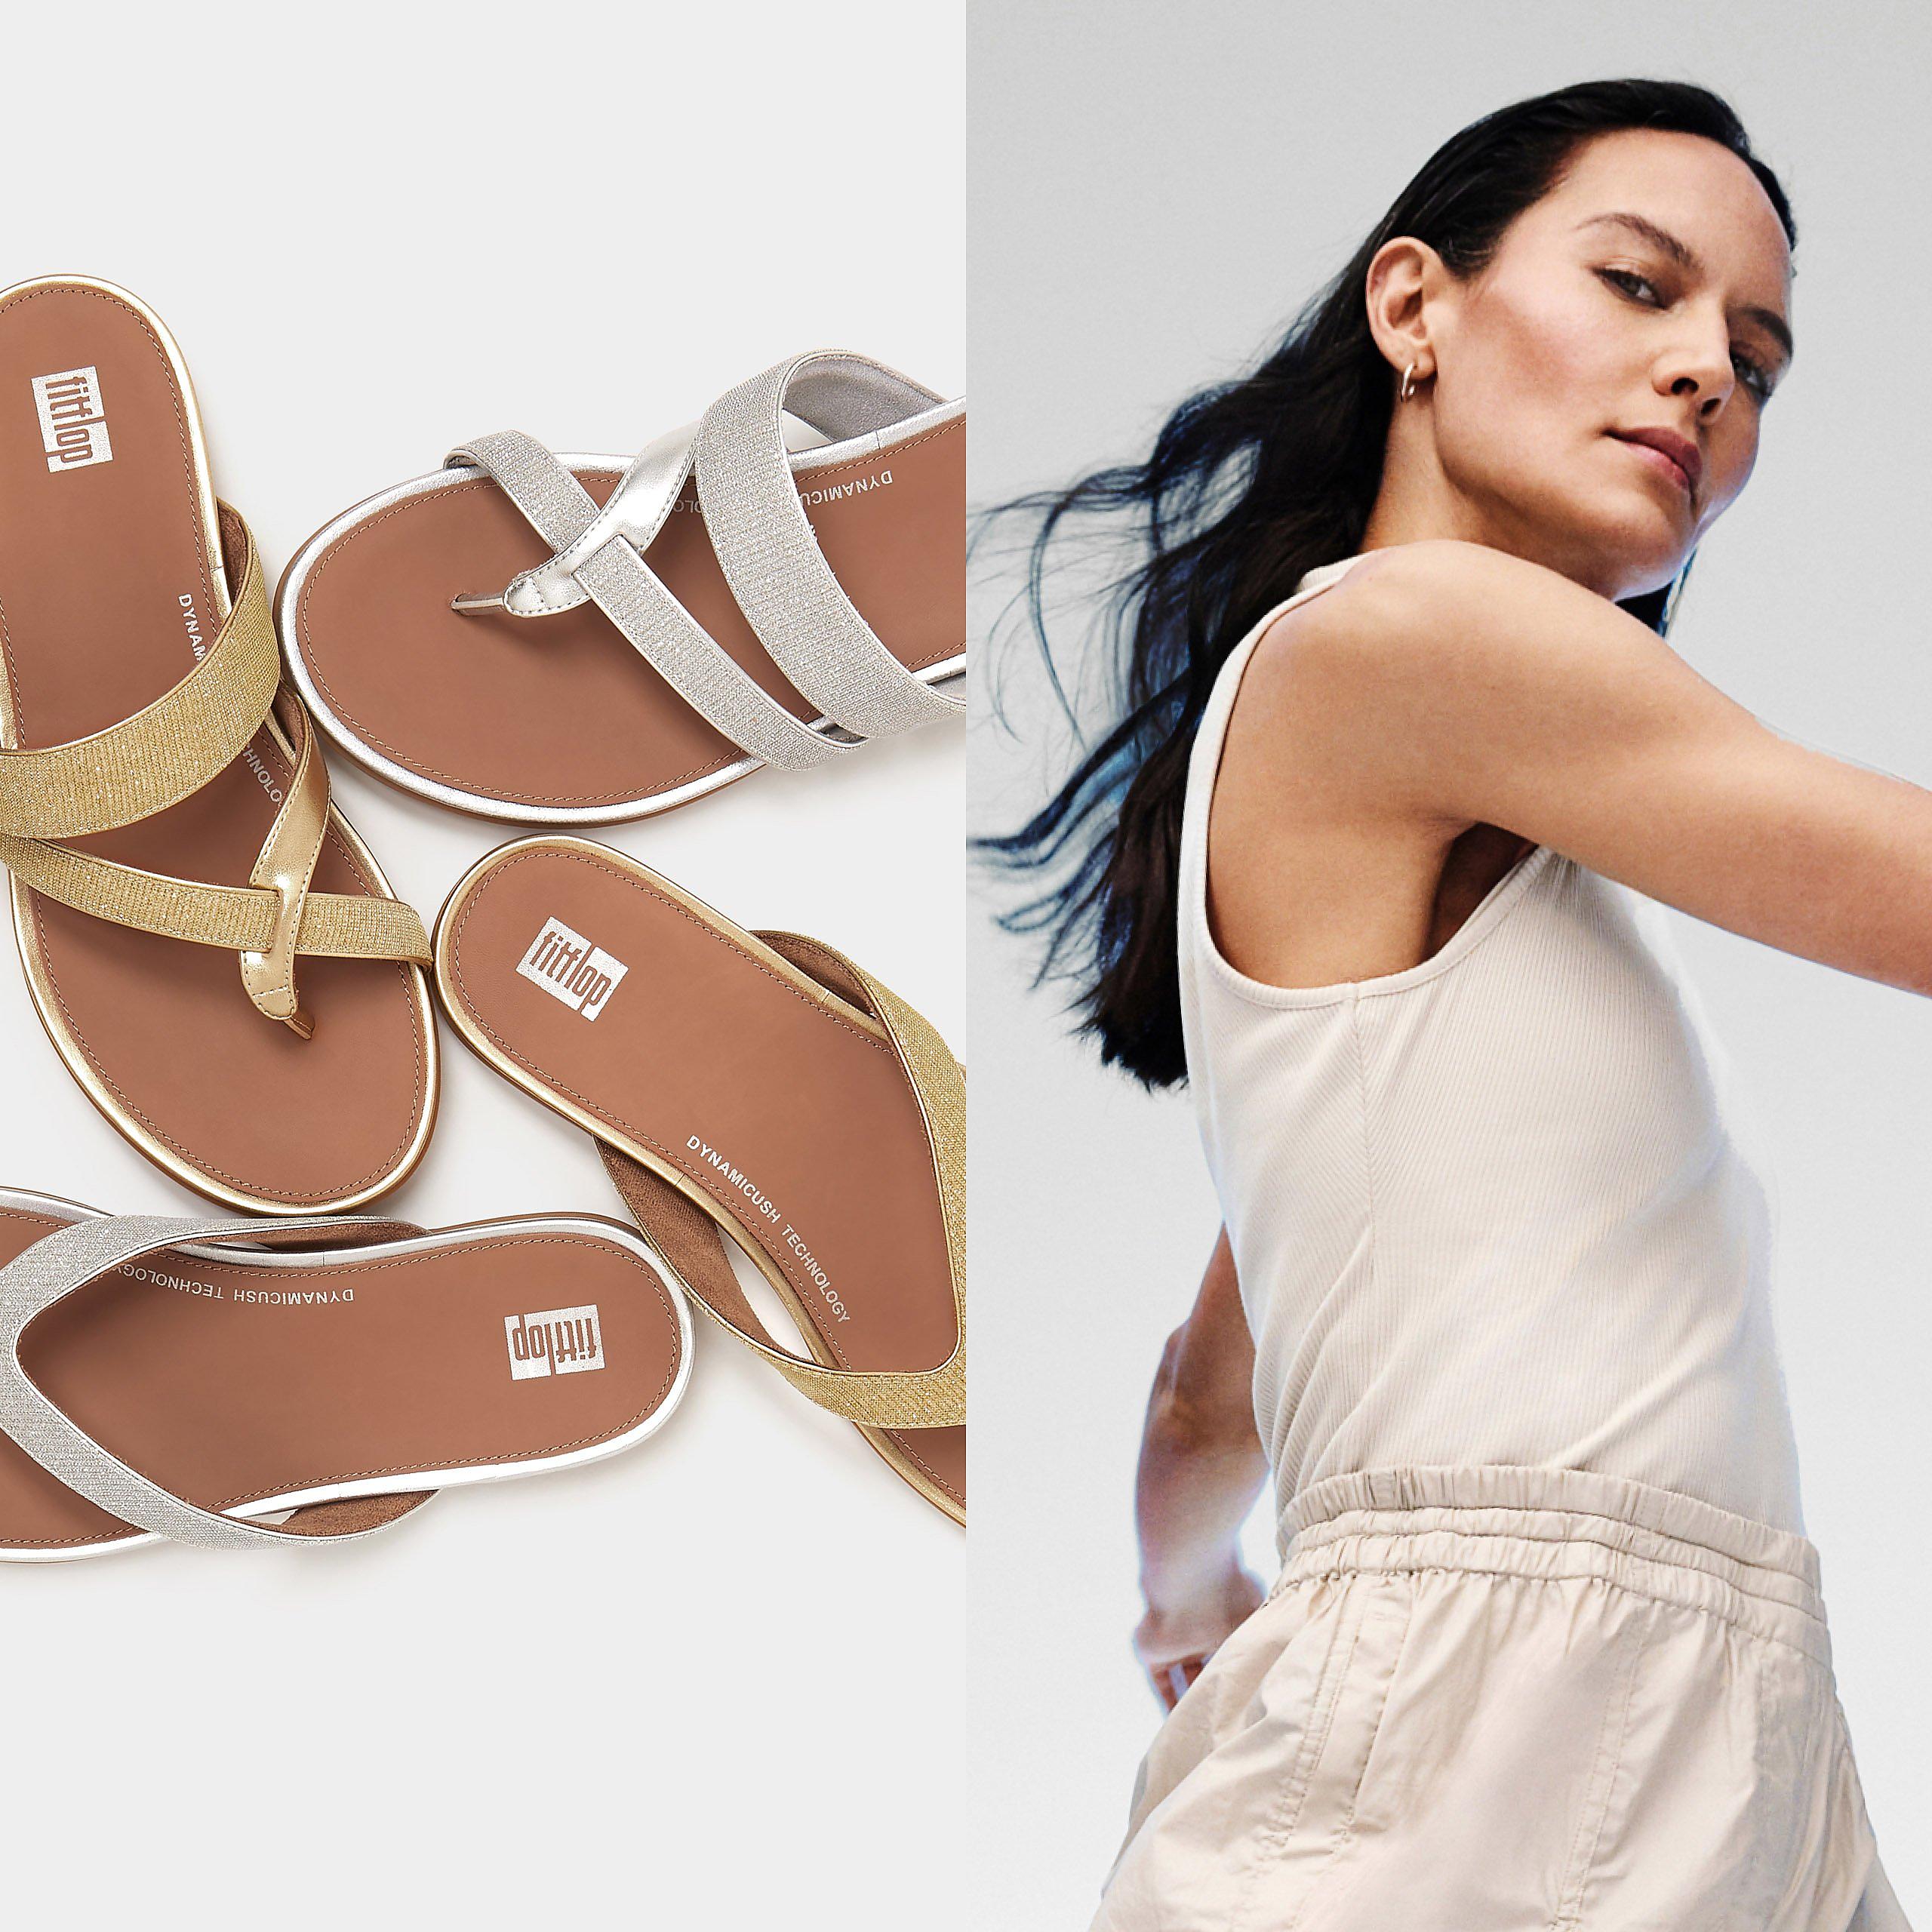 All Sandals Collection featuring the Gracie toe post